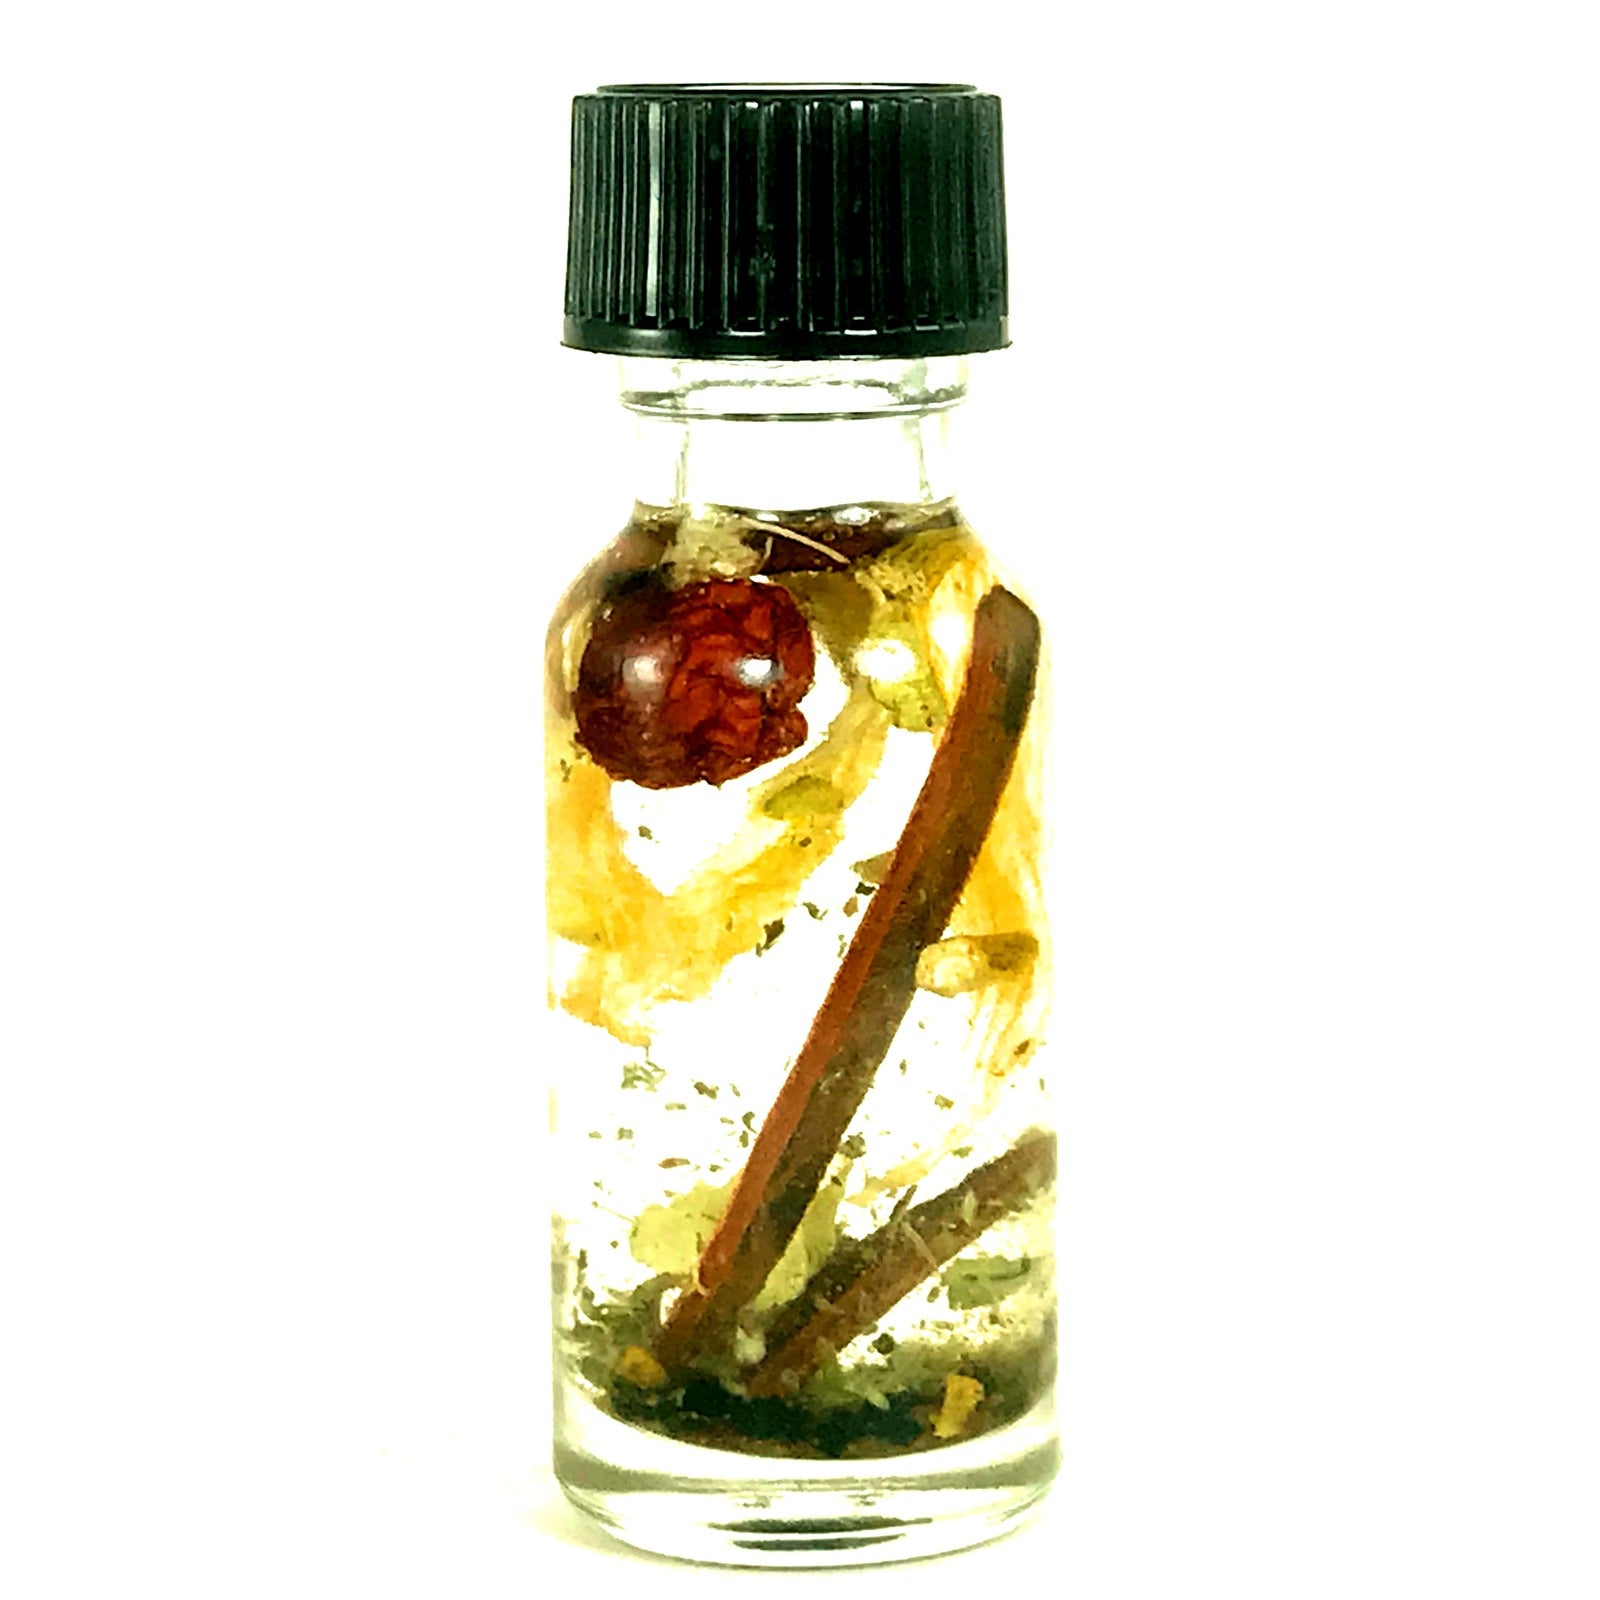 Twichery Business Success Oil: Make your next creative endeavor a roaring financial success! Hoodoo Voodoo Wicca Pagan